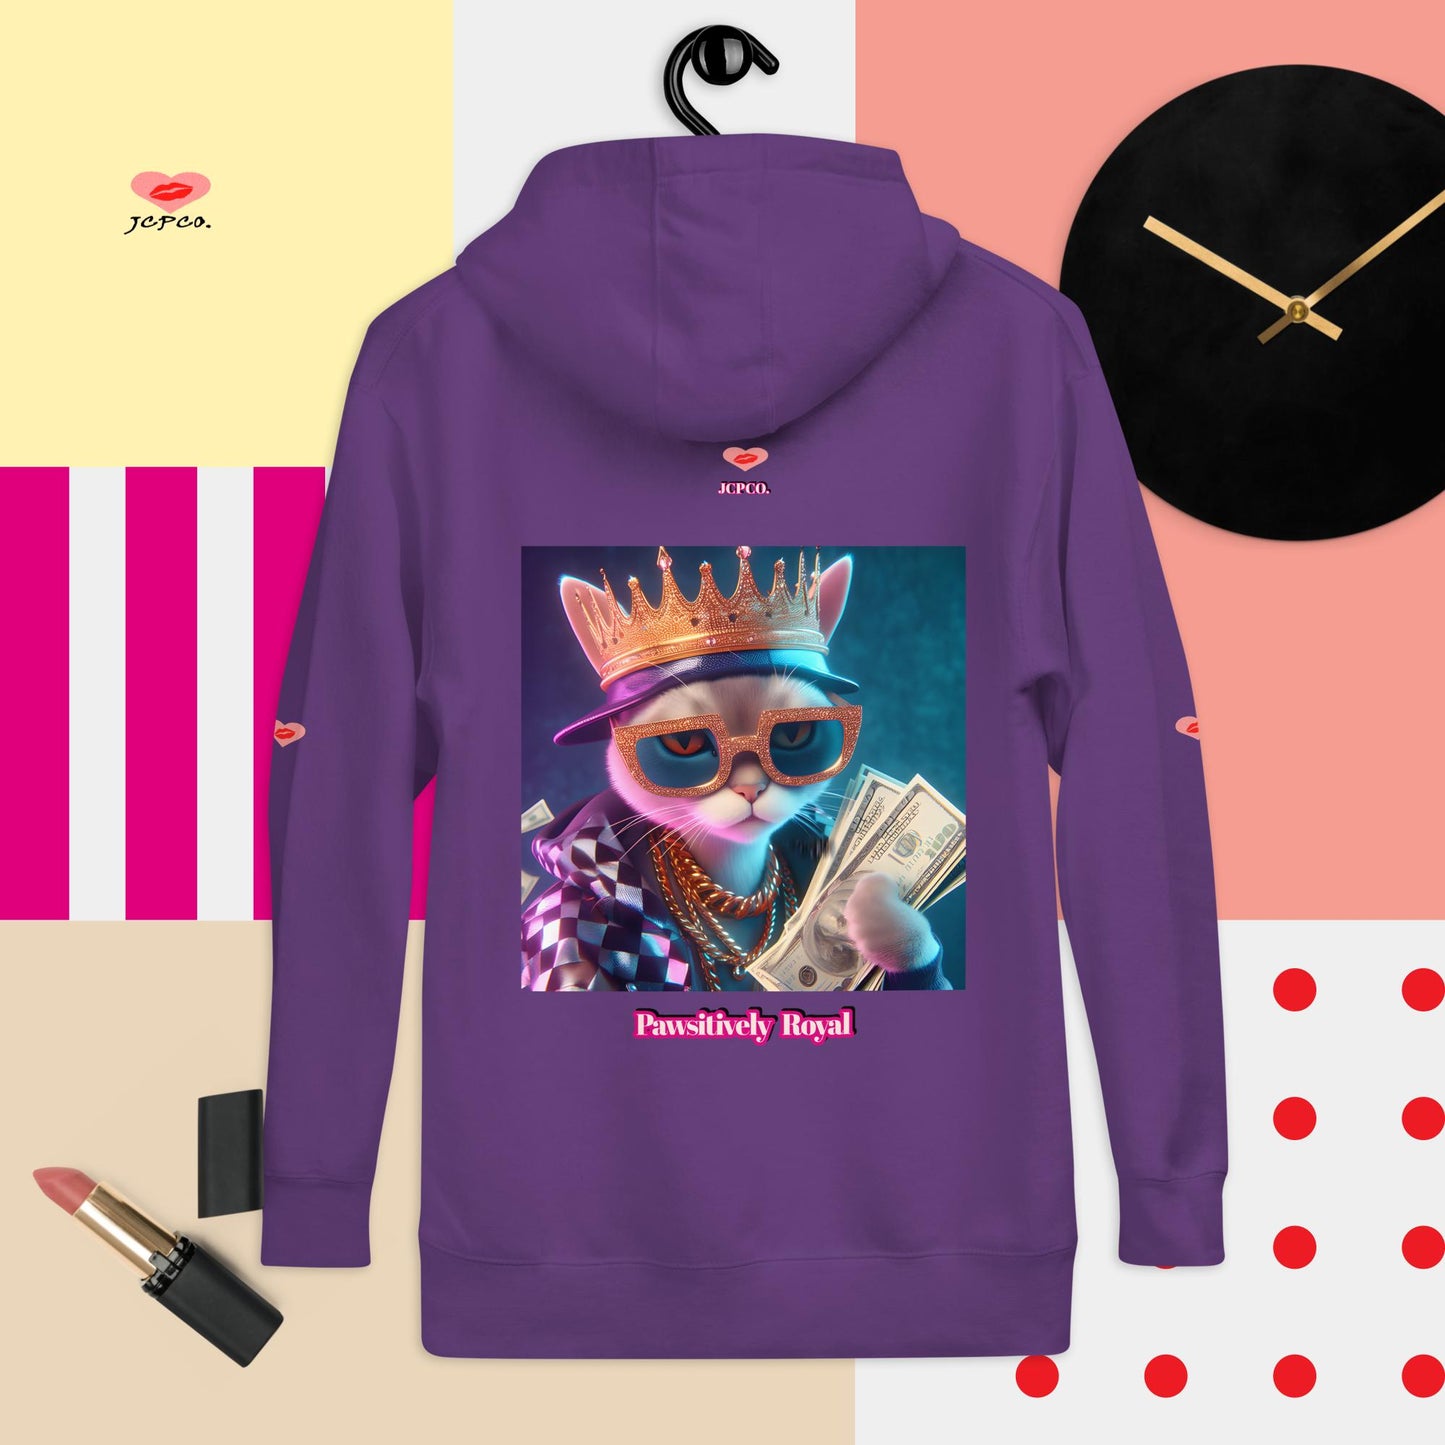 💕Money Meowves😸 Pawsitively Royal Kitty Cat😻 Unisex Hoodie🧥